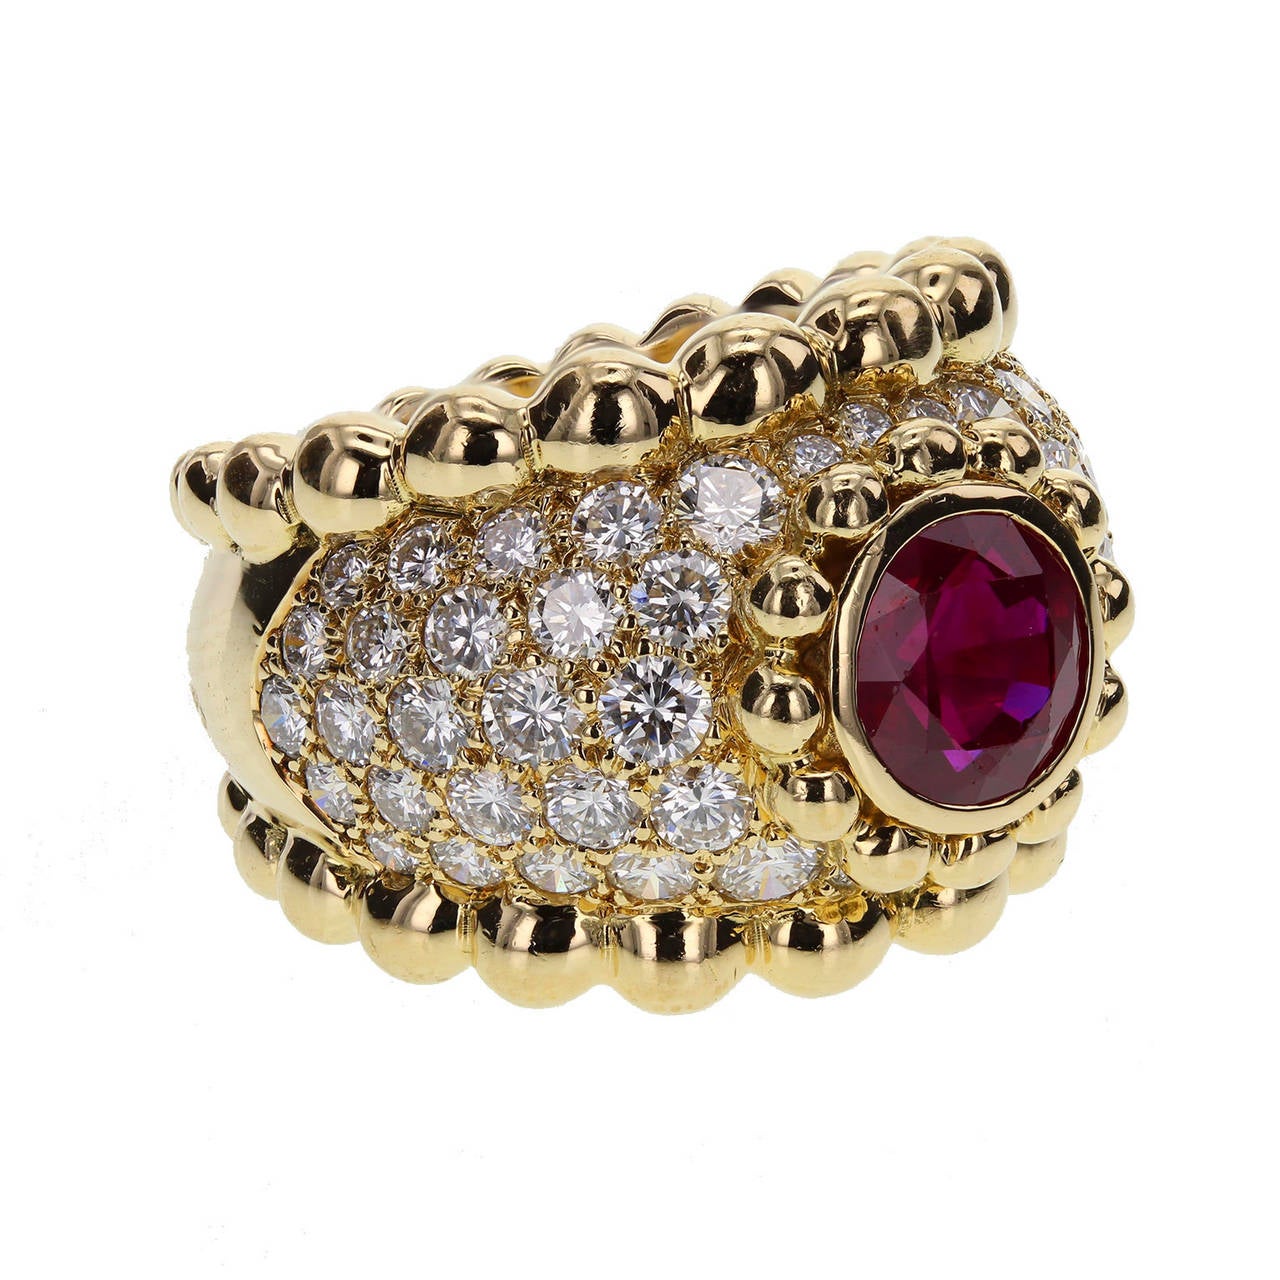 From Chanel Paris, a central 1.40 carat brilliant cut ruby of exceptional blood-red colour, rubover set and decorated with gold bead surround, on a pave diamond band with gold bead edges. French marks.
Size J (leading edge)